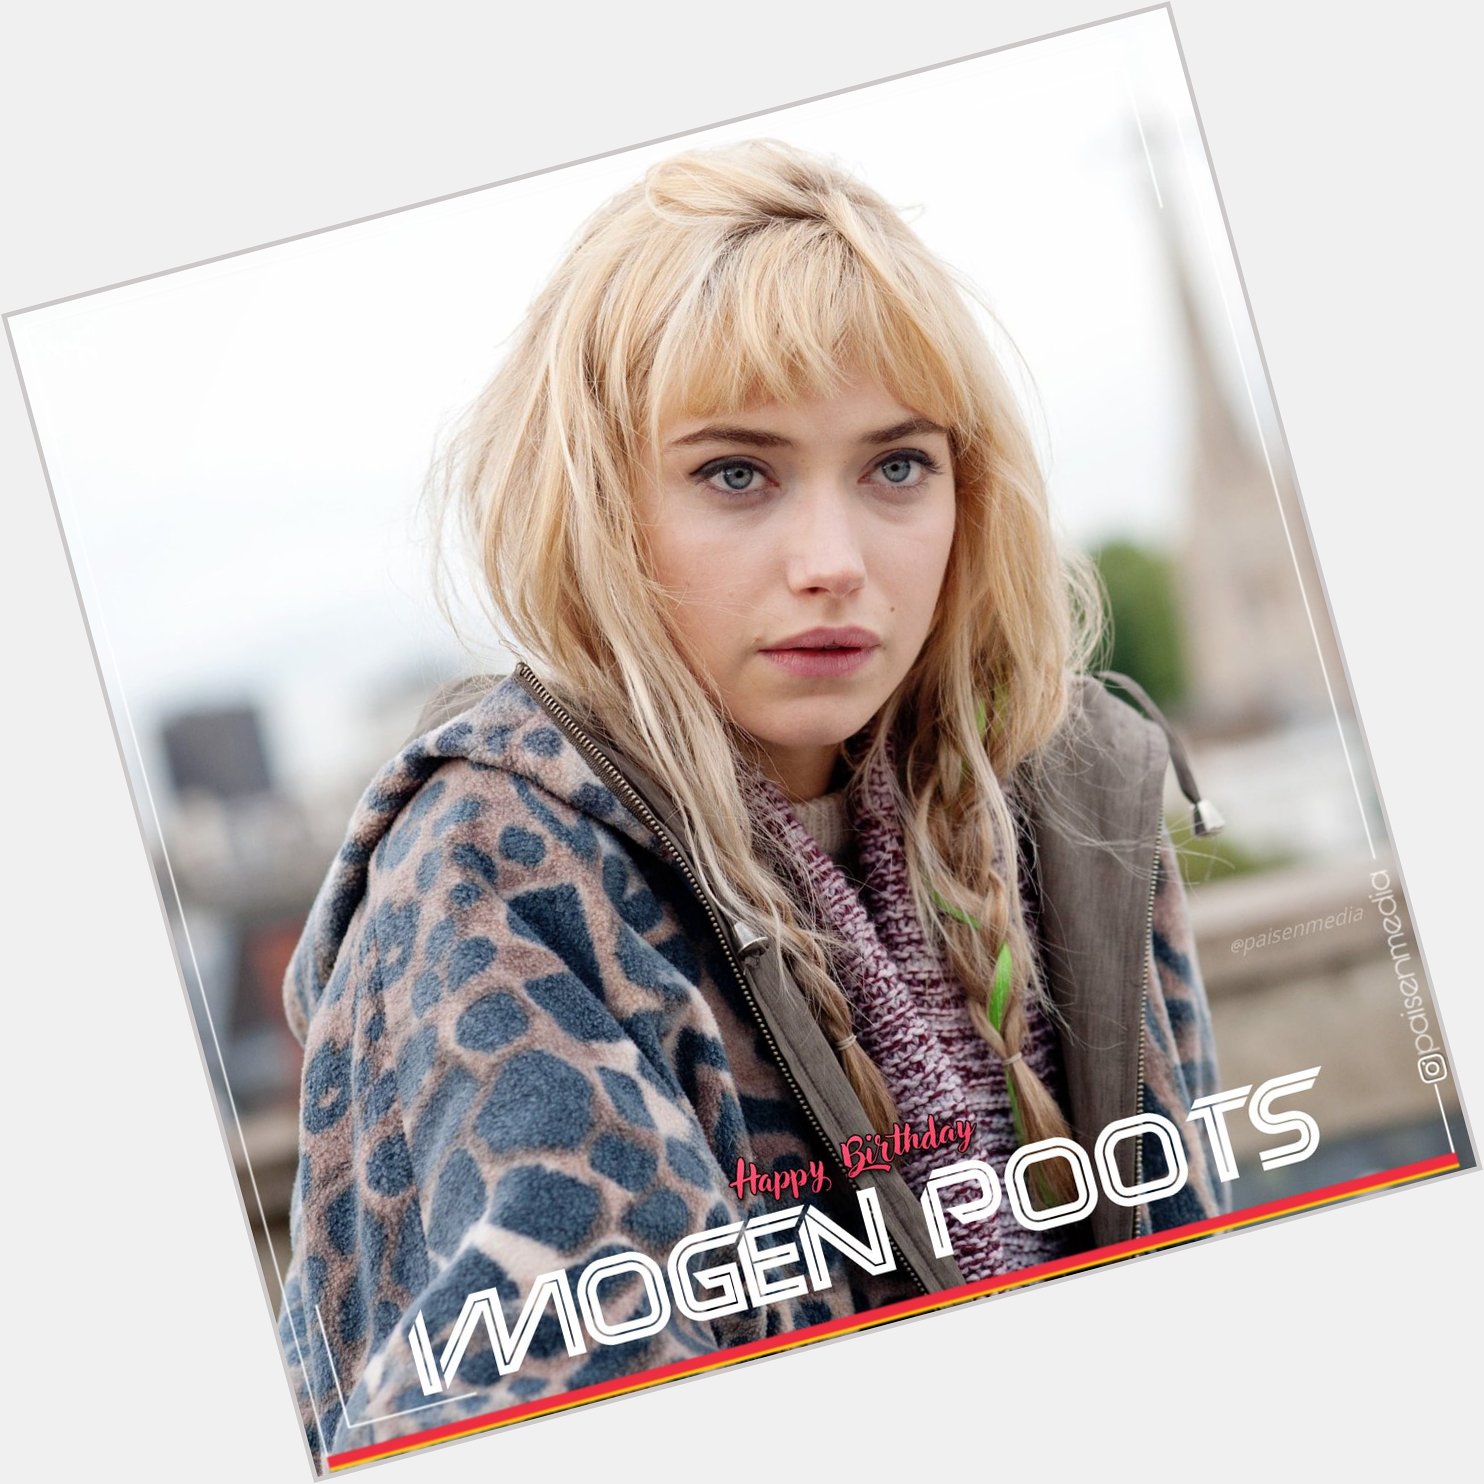 Wishing a very Happy Birthday to Imogen Poots ma\am .
.
.
.  